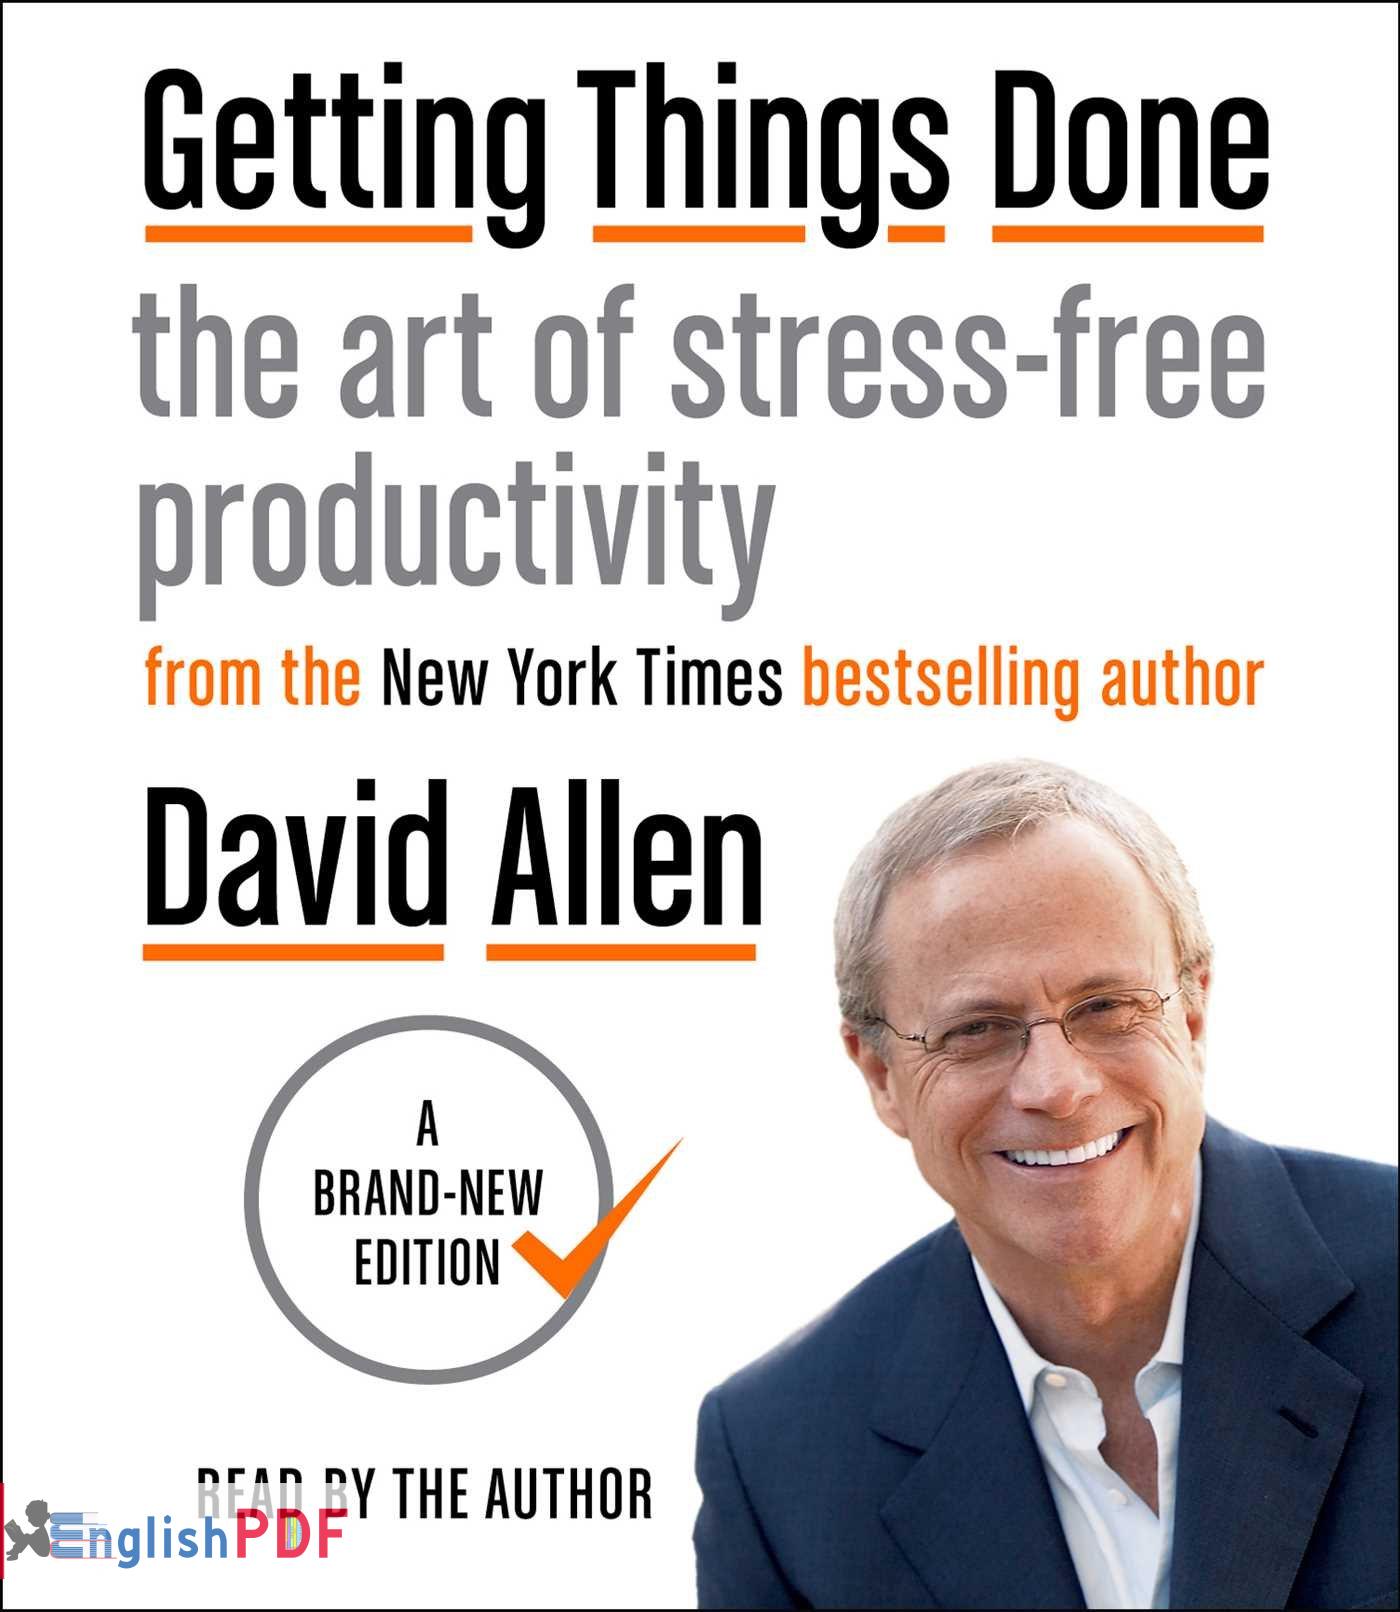 Getting Things Done PDF Download